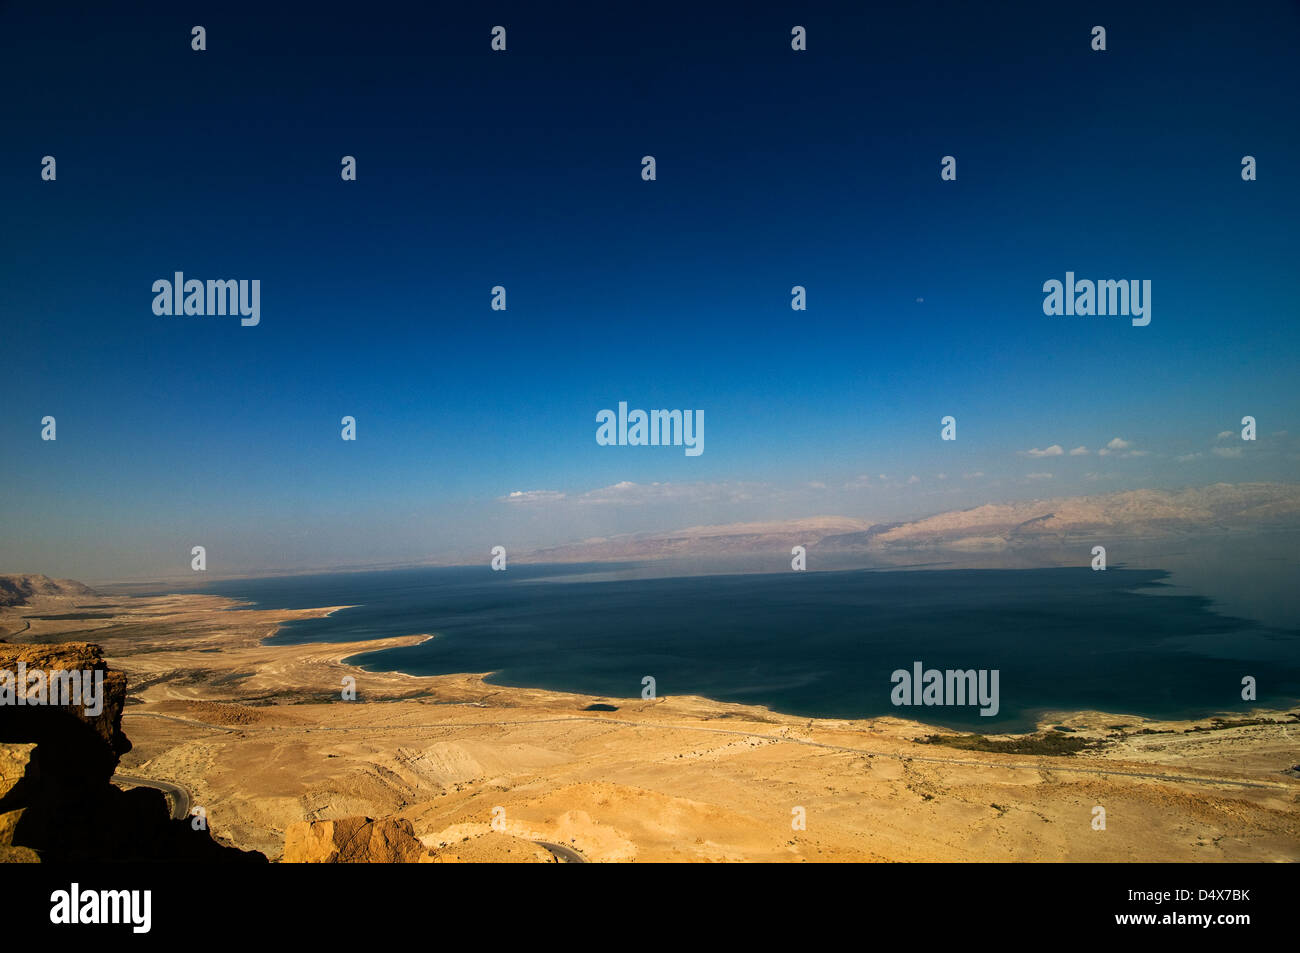 The beautiful Dead Sea as seen from the Judaean desert. Stock Photo